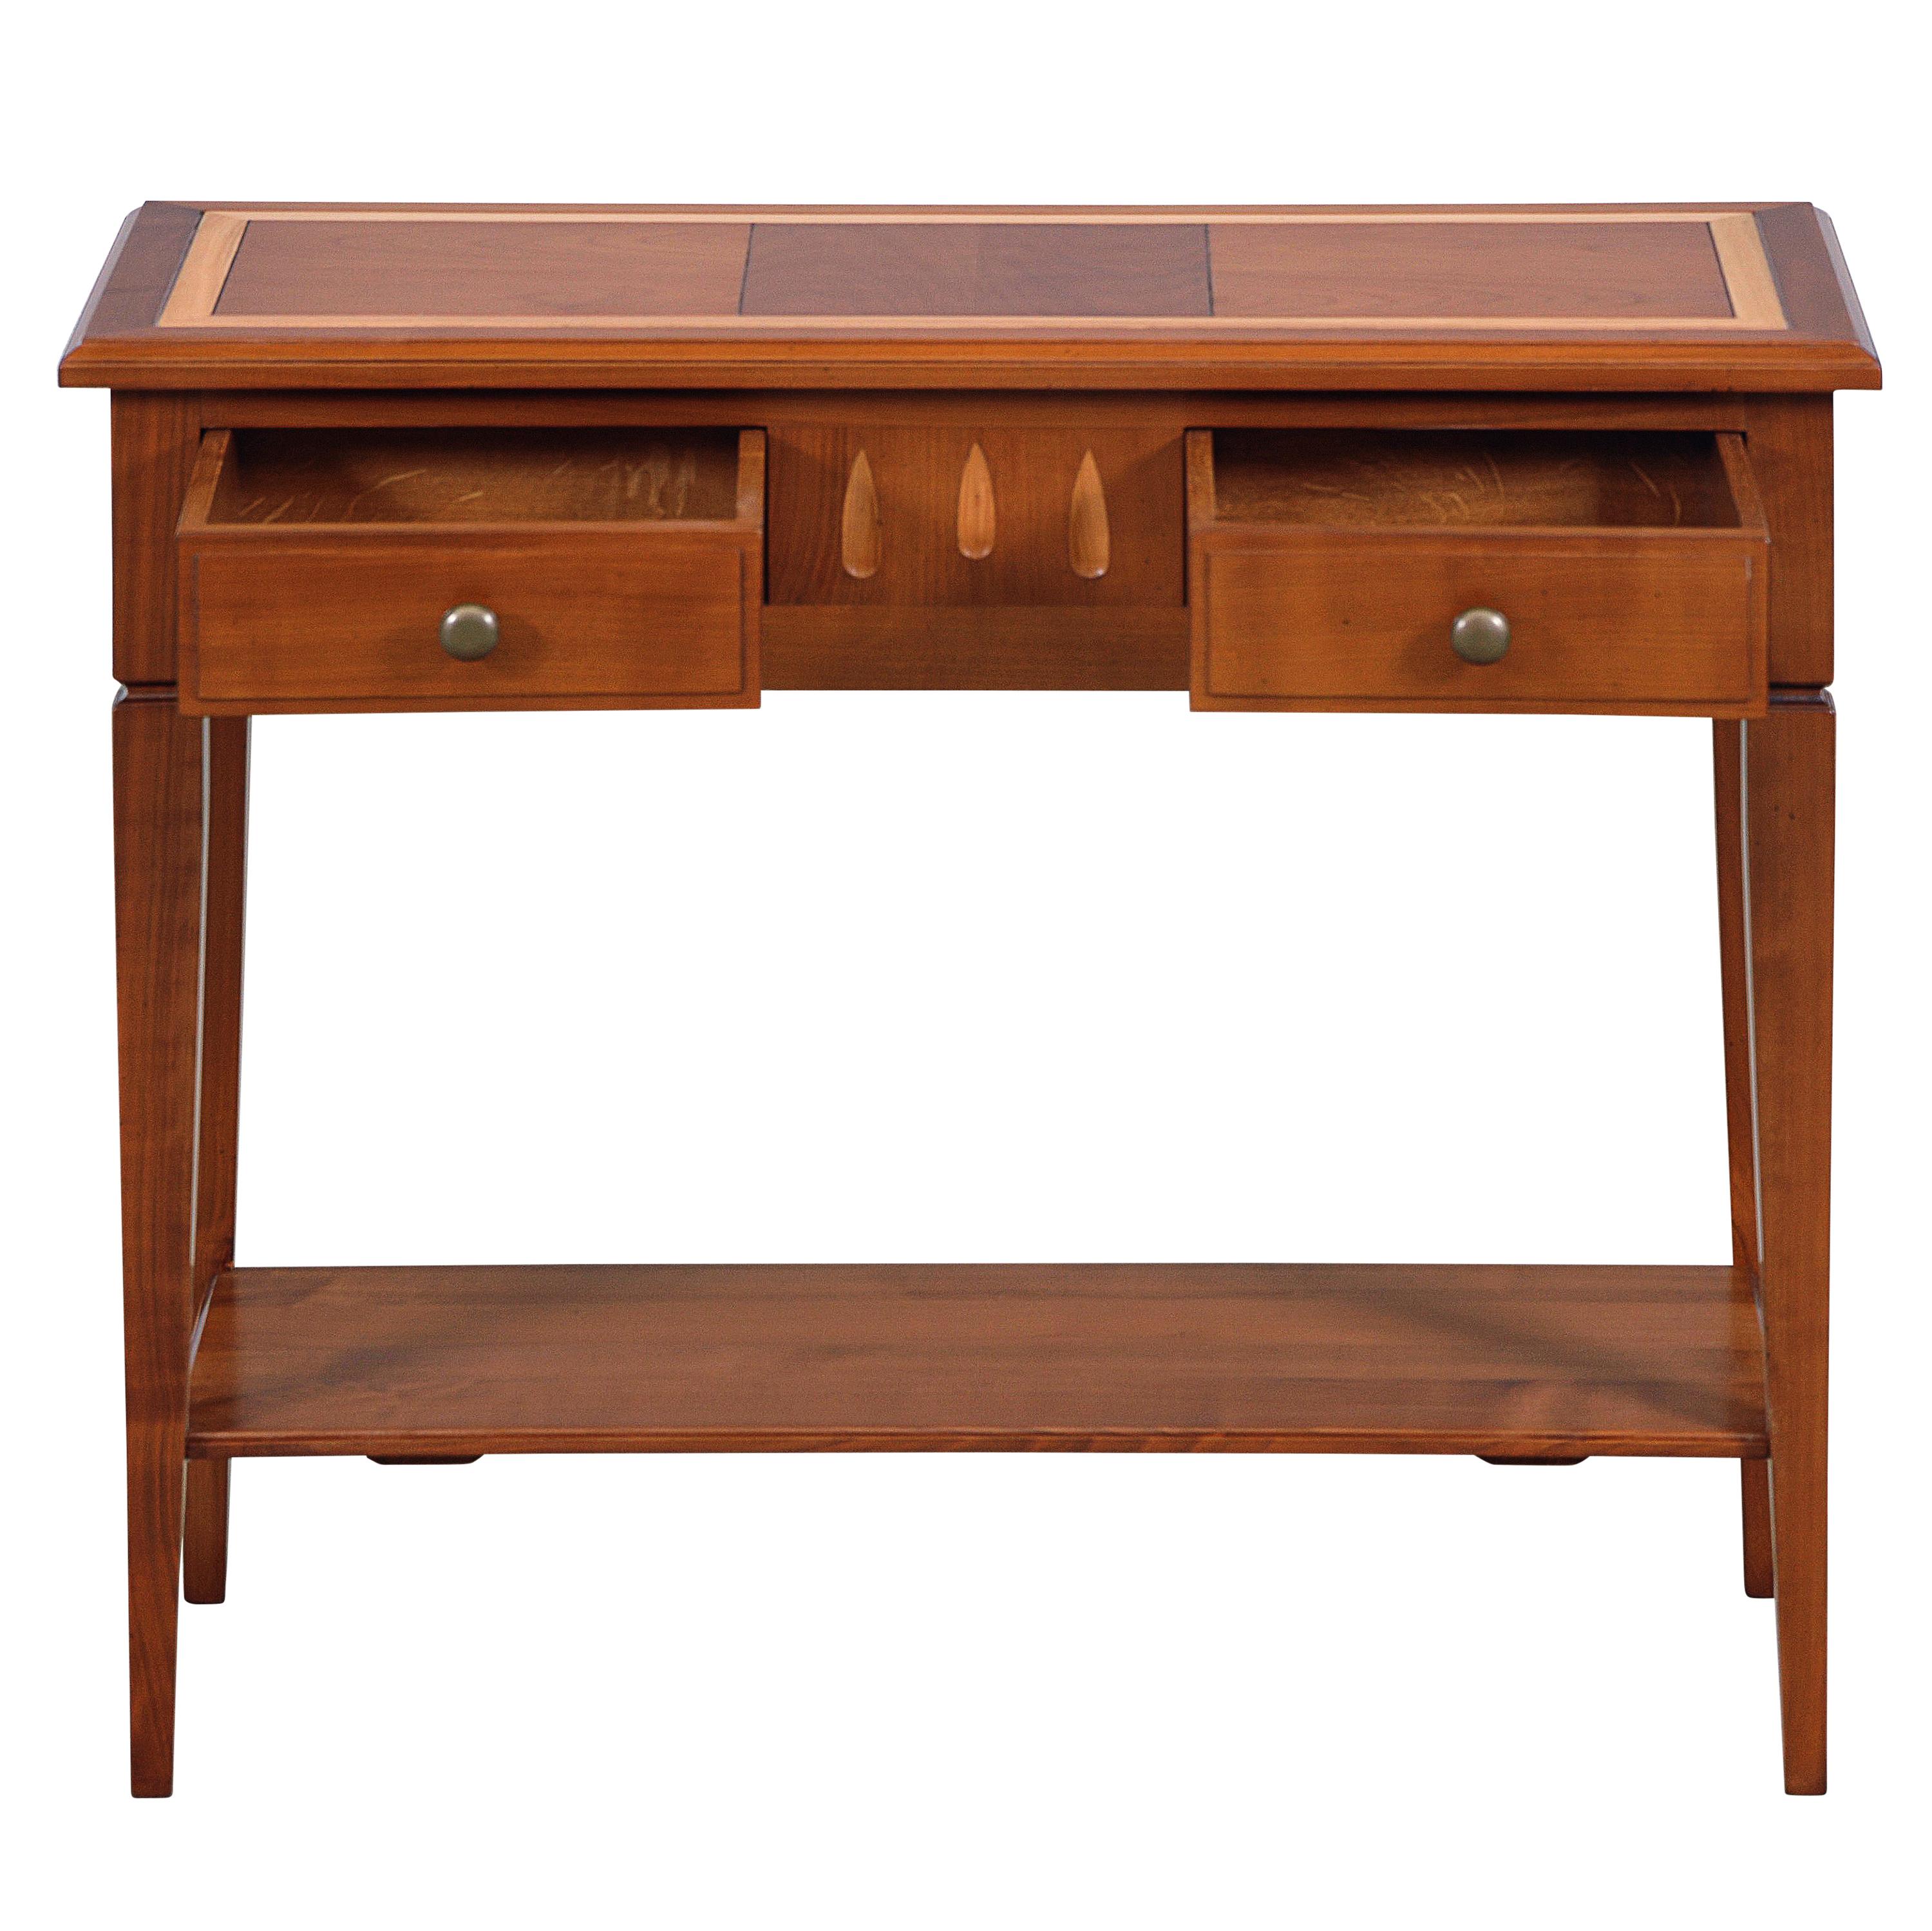 French Directoire Style Console Table in Cherry with a Secret Drawer Made in France For Sale